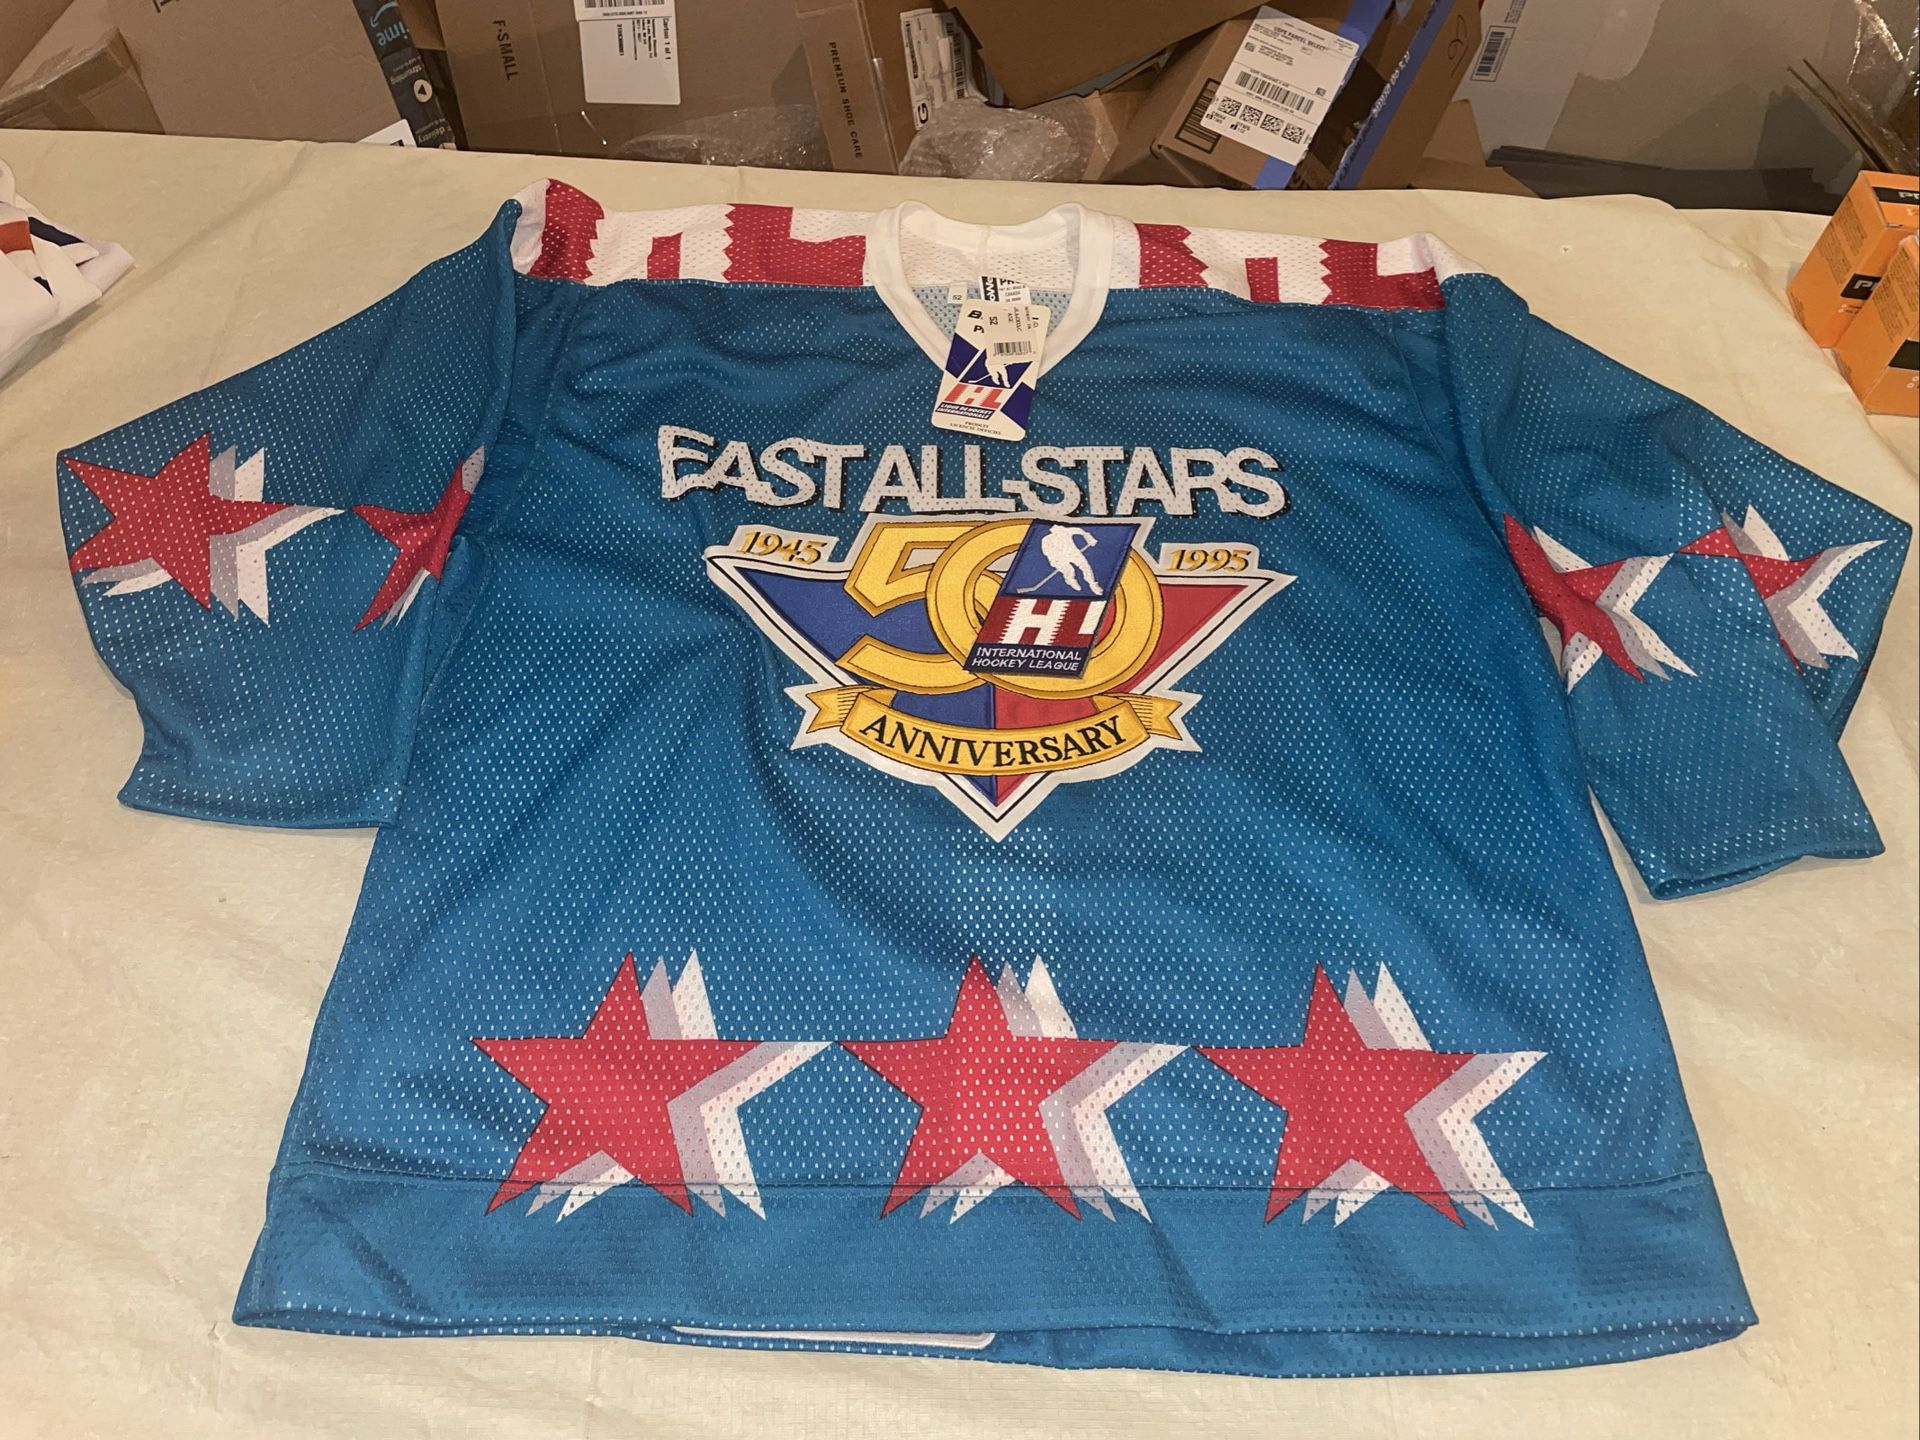 1995 Authentic All Star Ihl Nwt Jersey Teal New Mens 52 90s Vintage East Clean